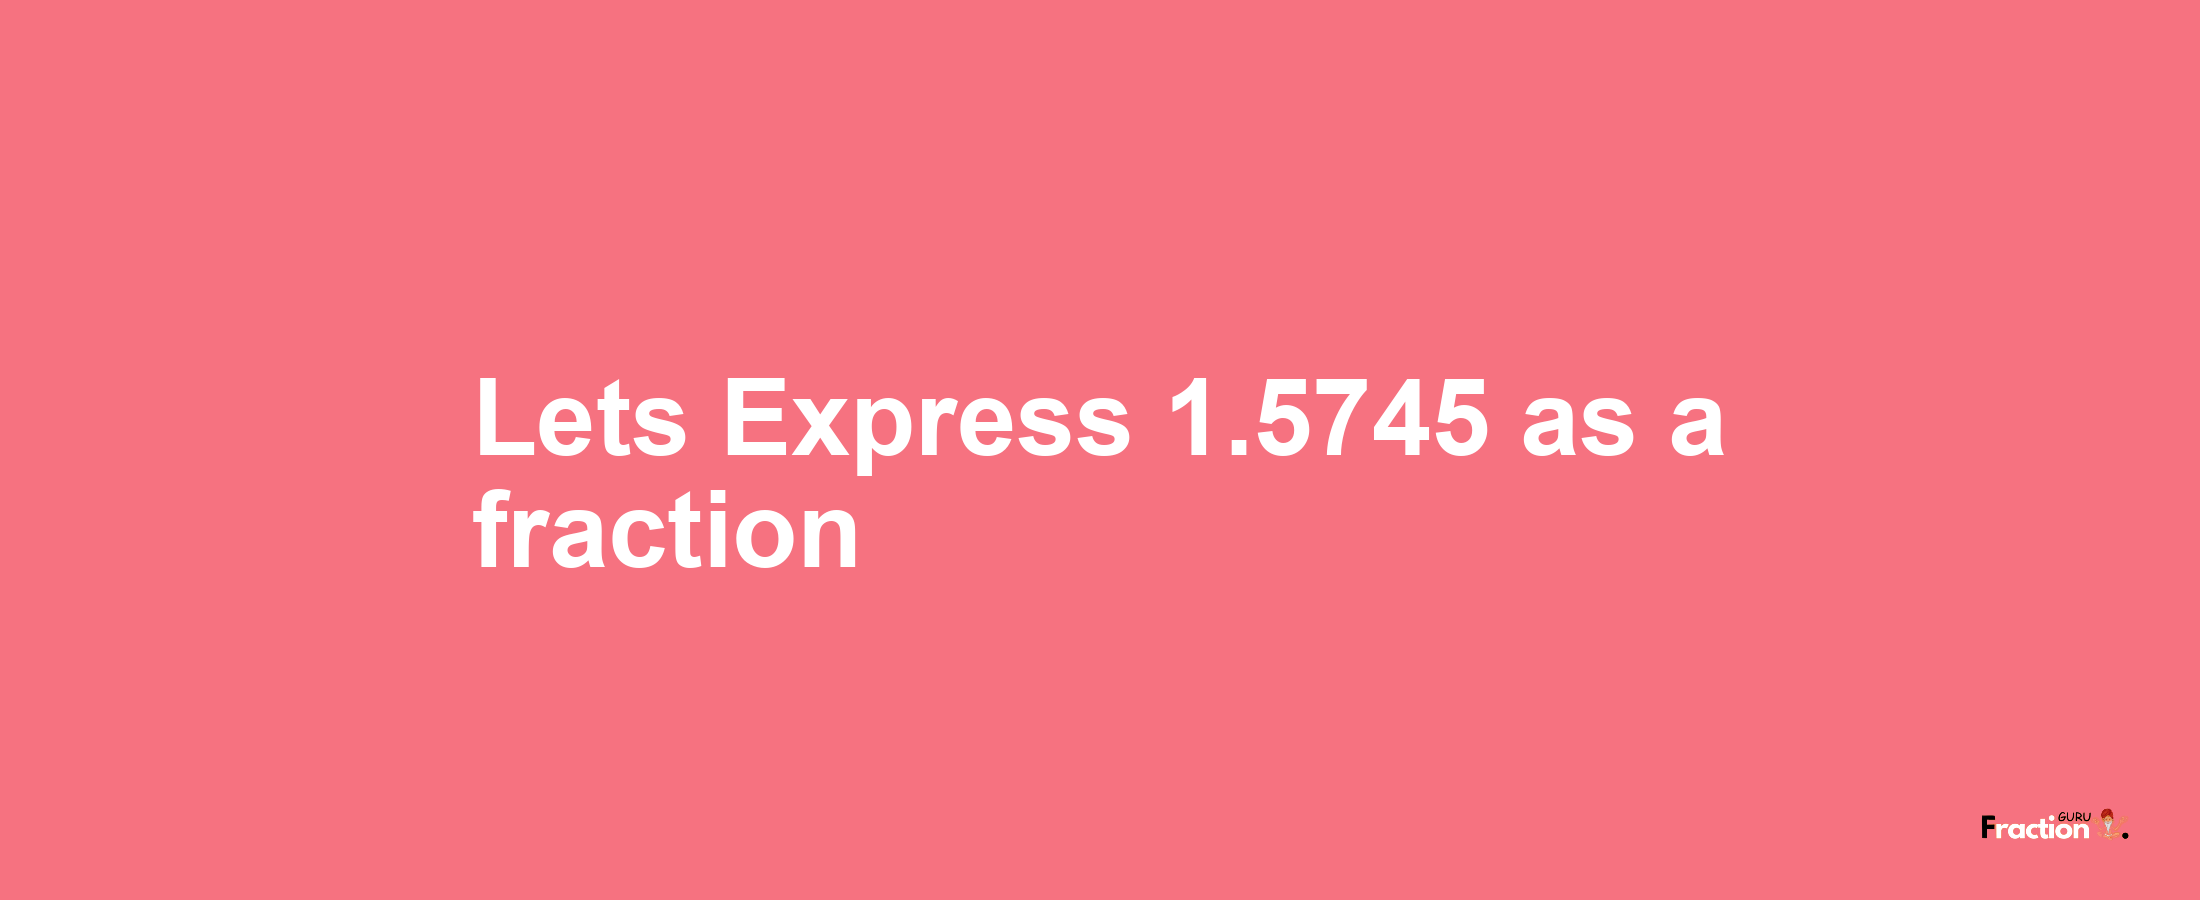 Lets Express 1.5745 as afraction